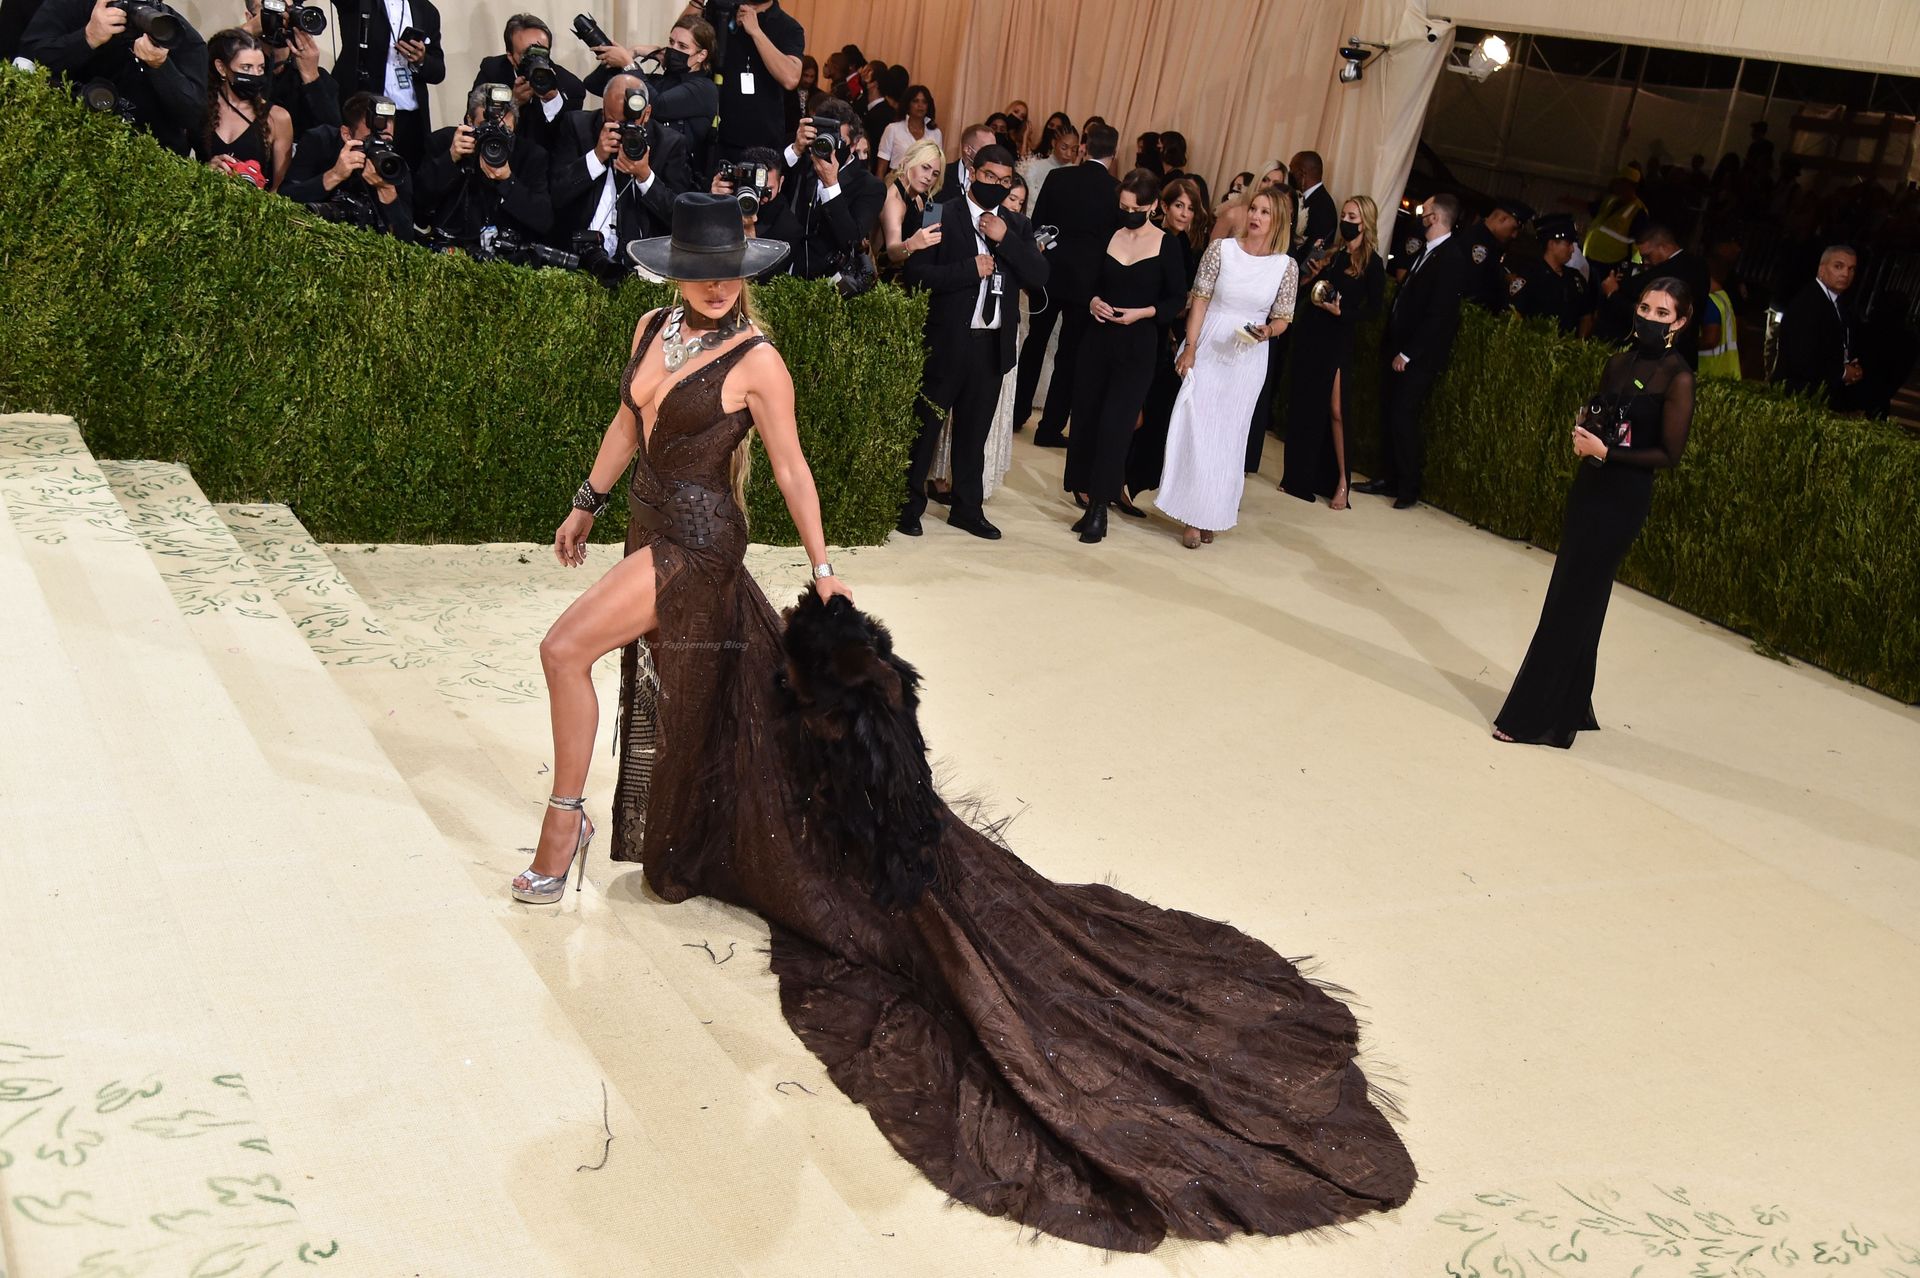 Jennifer Lopez Sho
ws Off Her Tits and Legs at the 2021 Met Gala in NYC (122 Photos) [Updated]